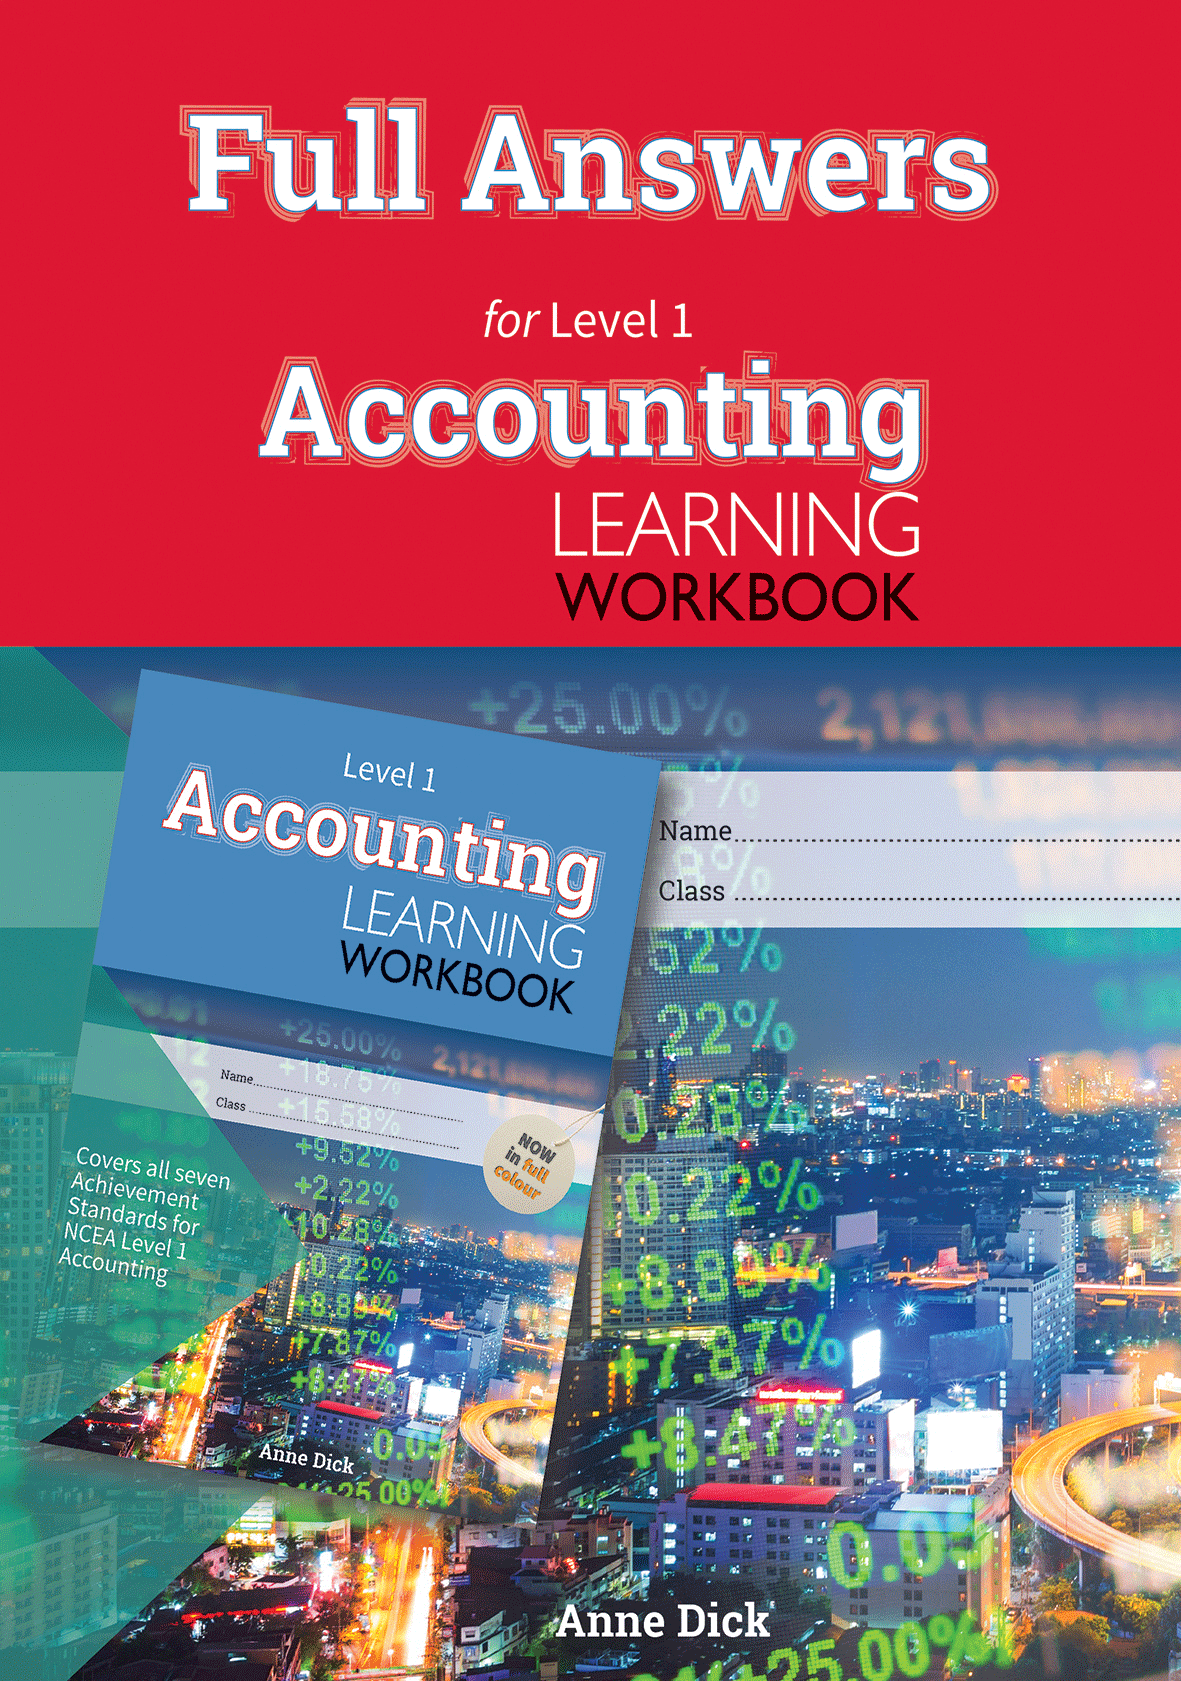 Full Answers for Level 1 Accounting Learning Workbook